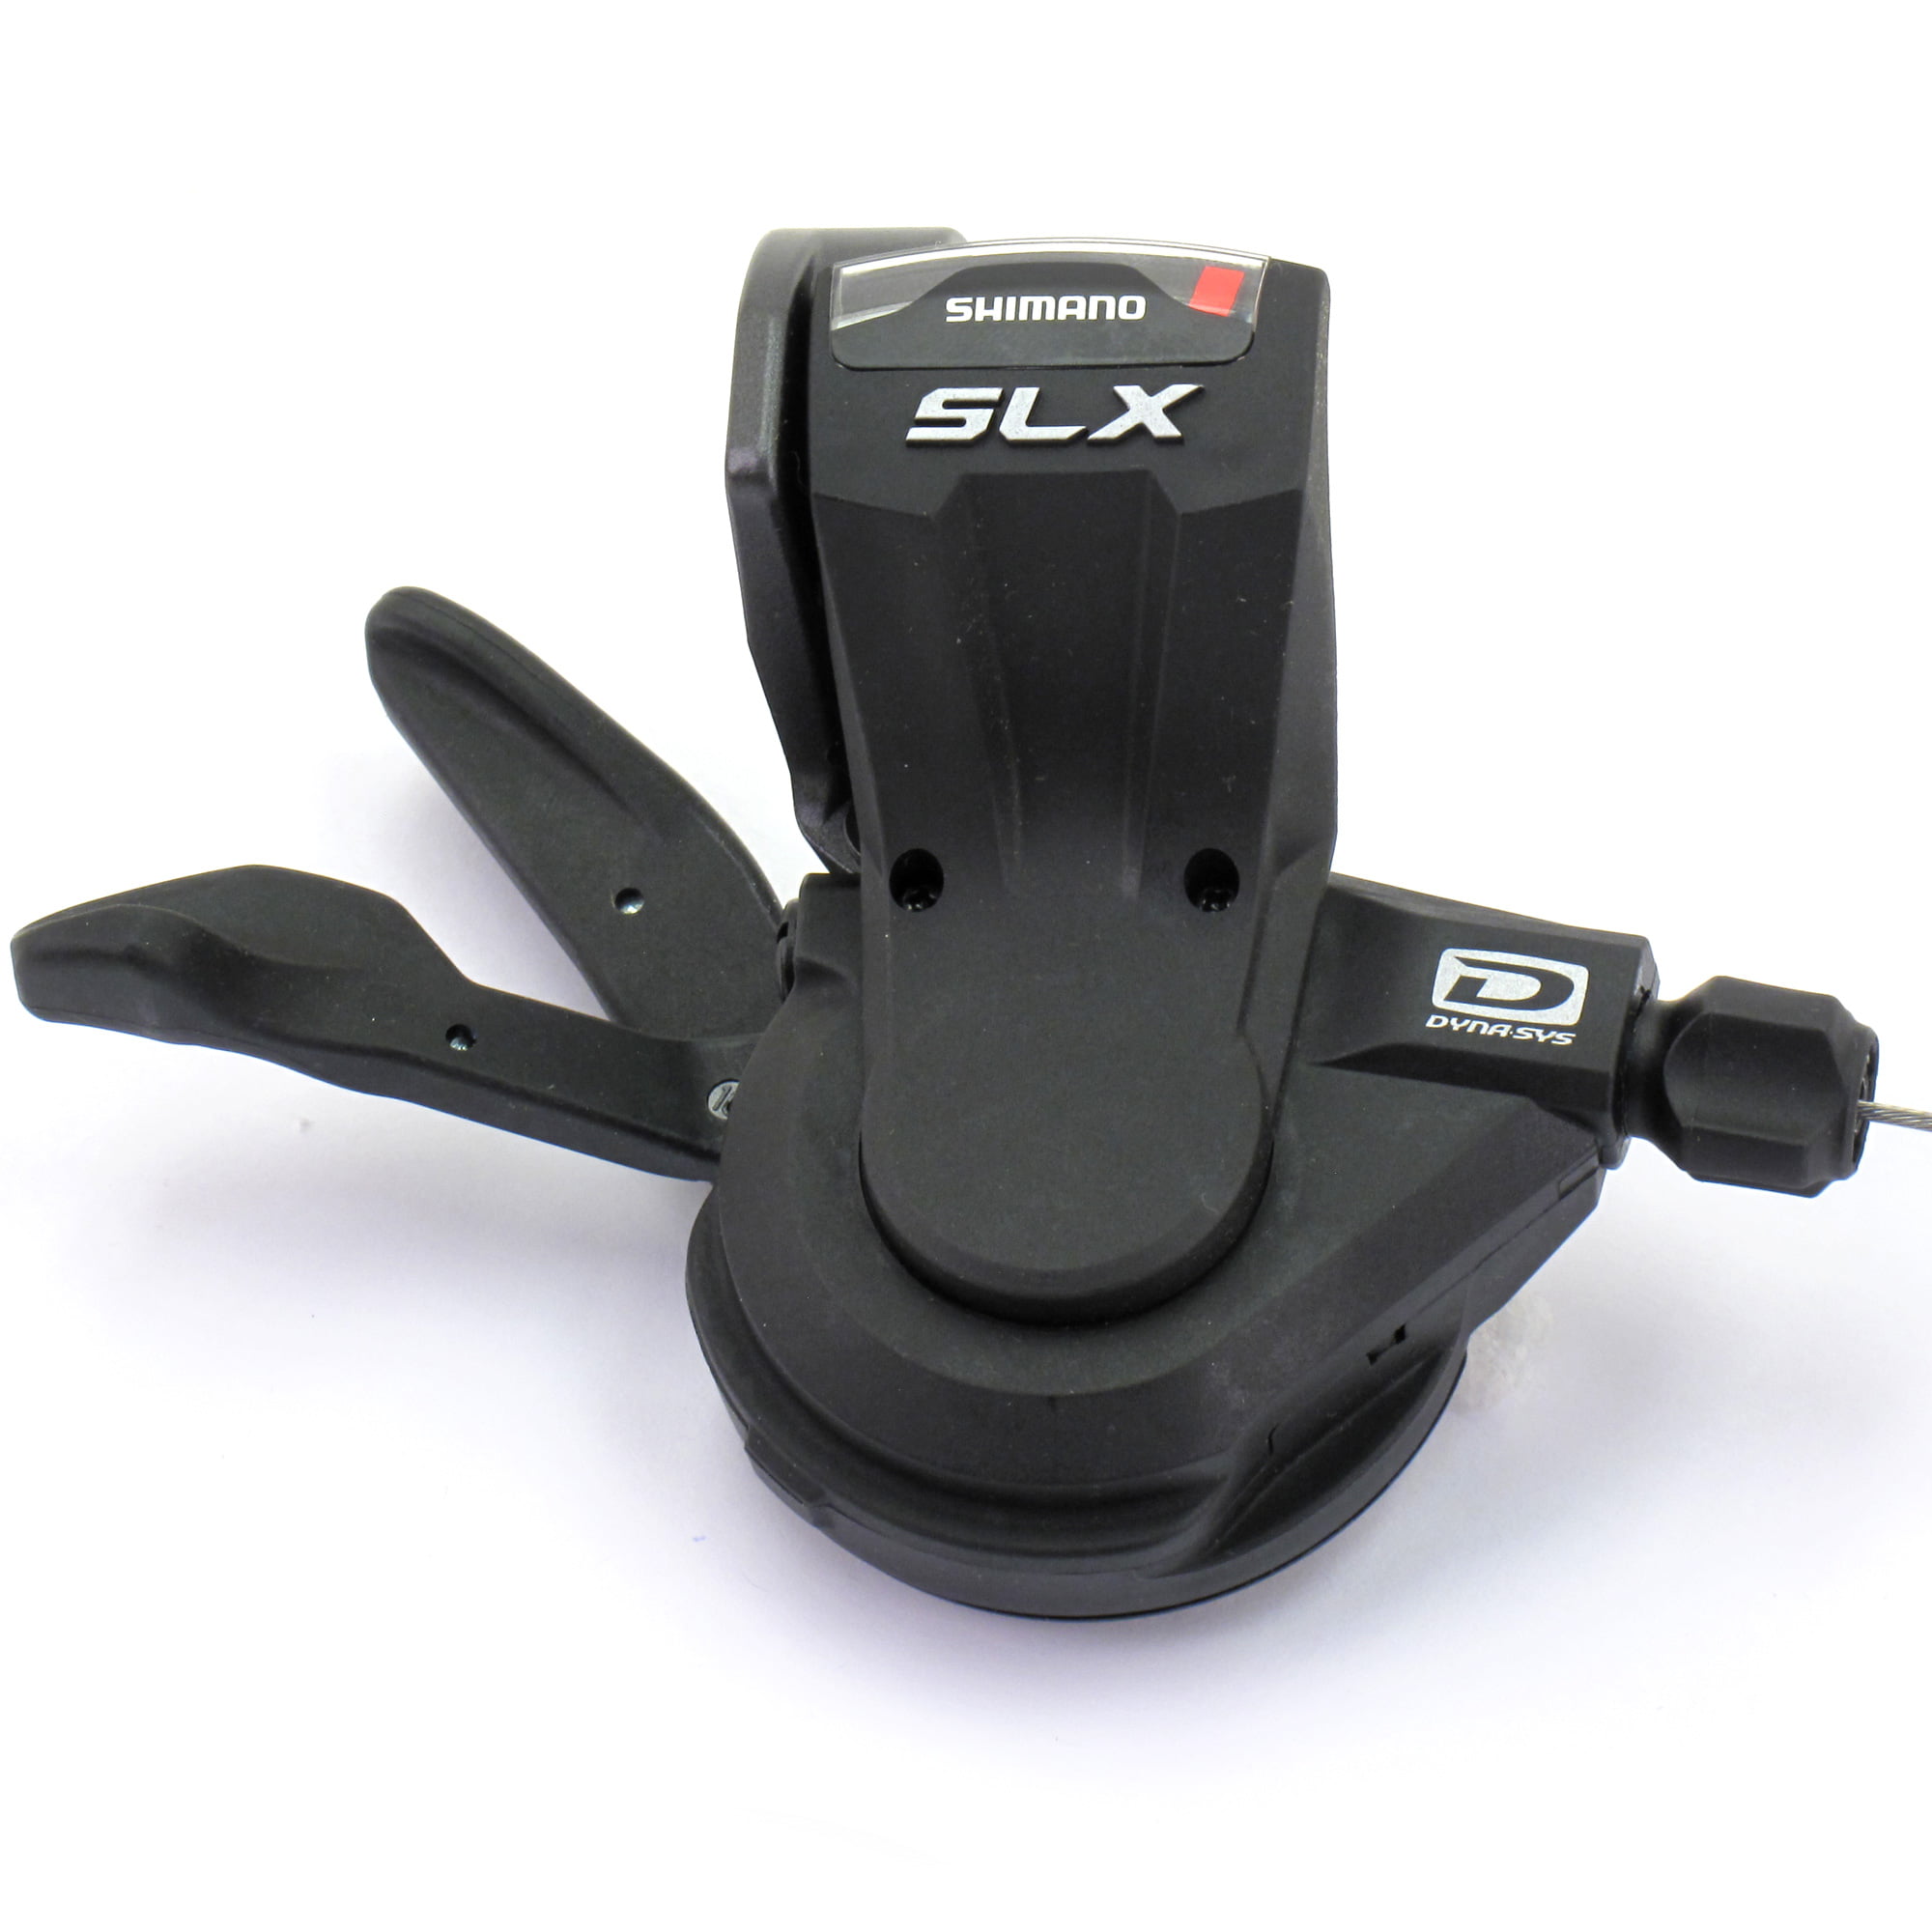 Details about   Shimano Shifter SLX SL-M660 Front Rapid Fire 2 way release Mountain Shifter 